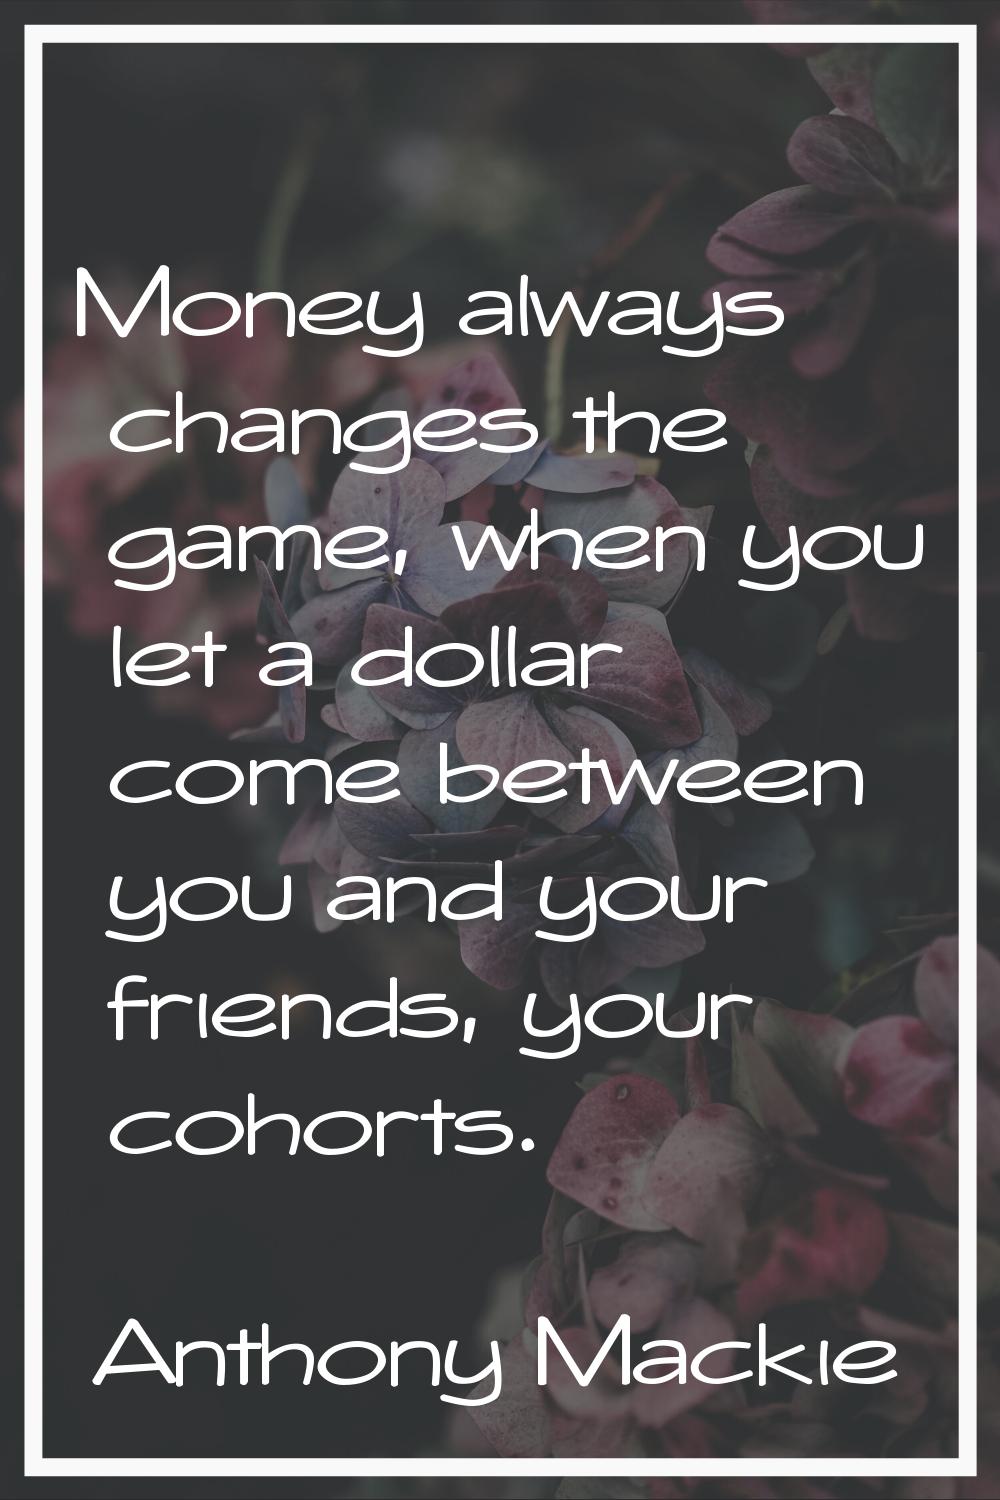 Money always changes the game, when you let a dollar come between you and your friends, your cohort